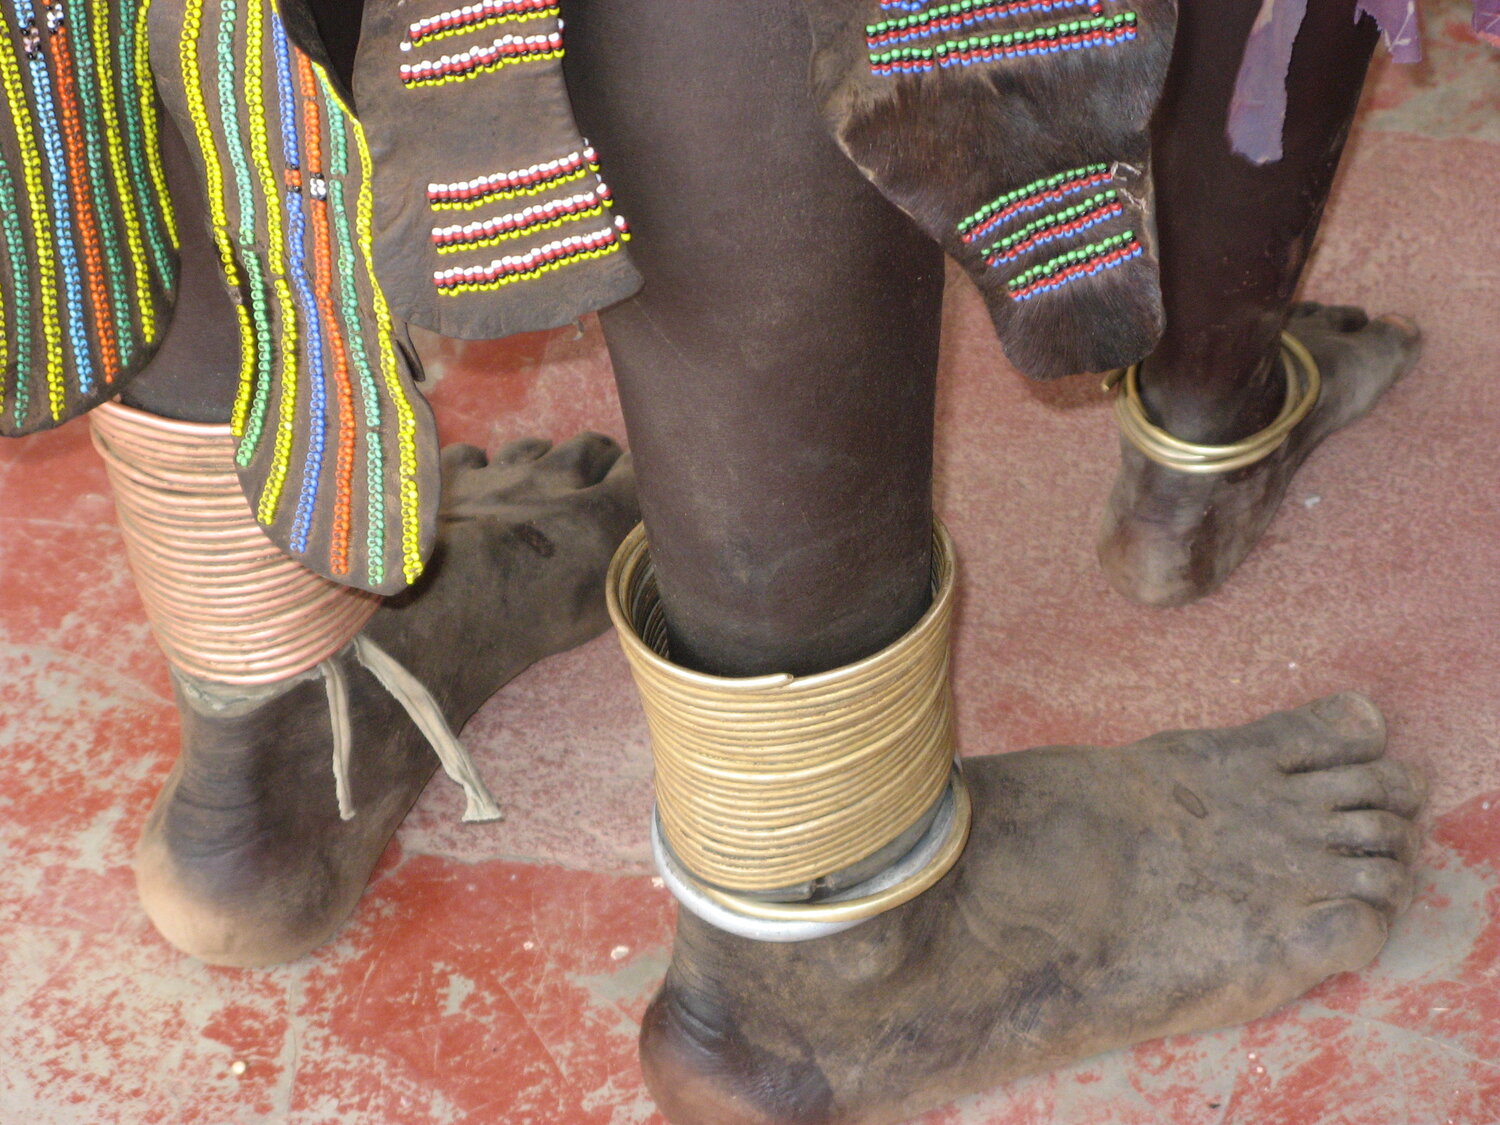 Toposa anklets fashioned from bullet casings.jpeg